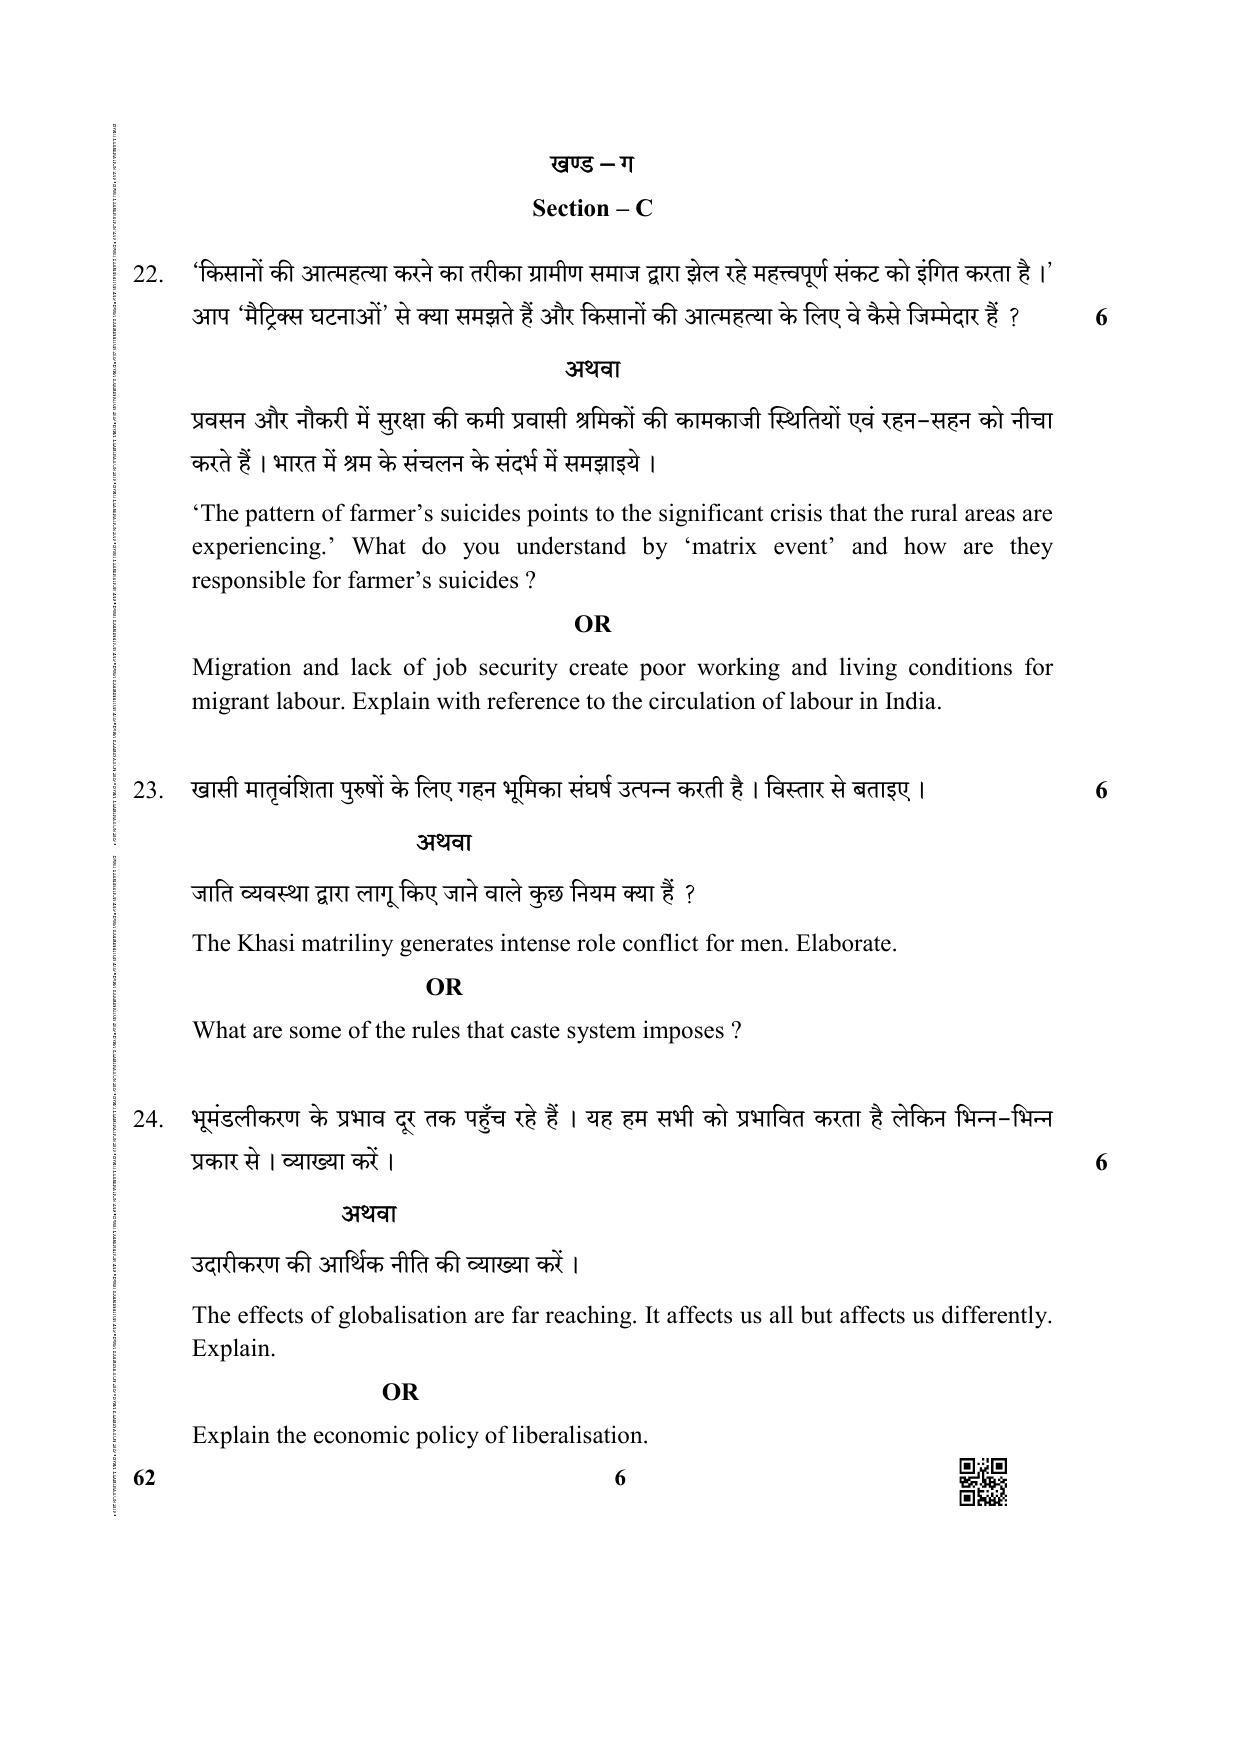 CBSE Class 12 62 (Sociology) 2019 Question Paper - Page 6